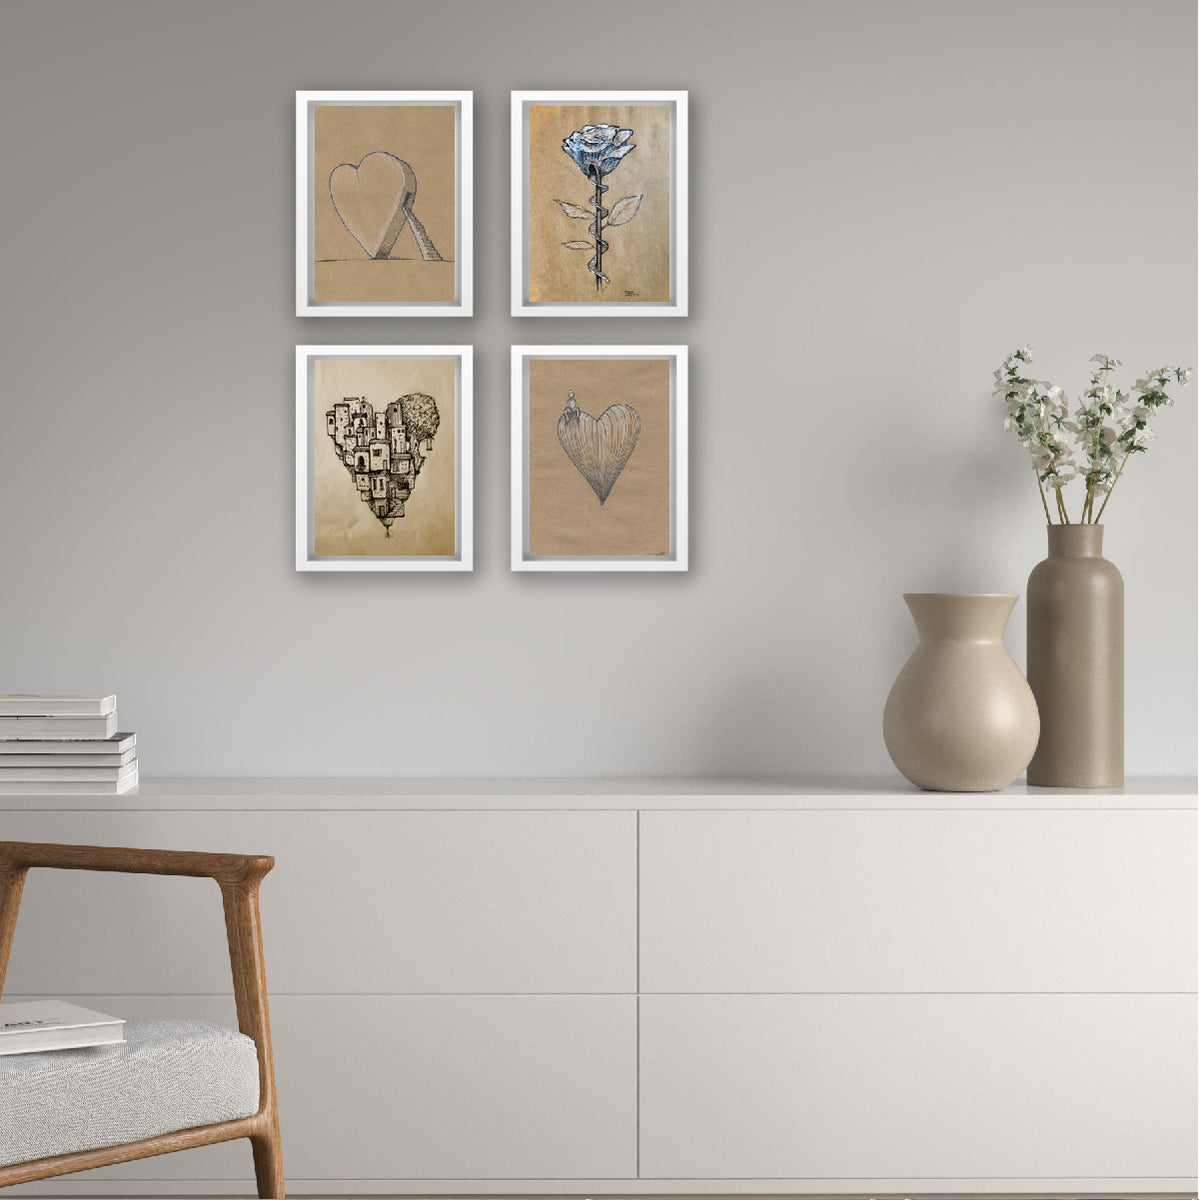 set of four prints by artist sam farrar of valentine's day cards - heart staircase, rose staircase, heart home, and heart sitter